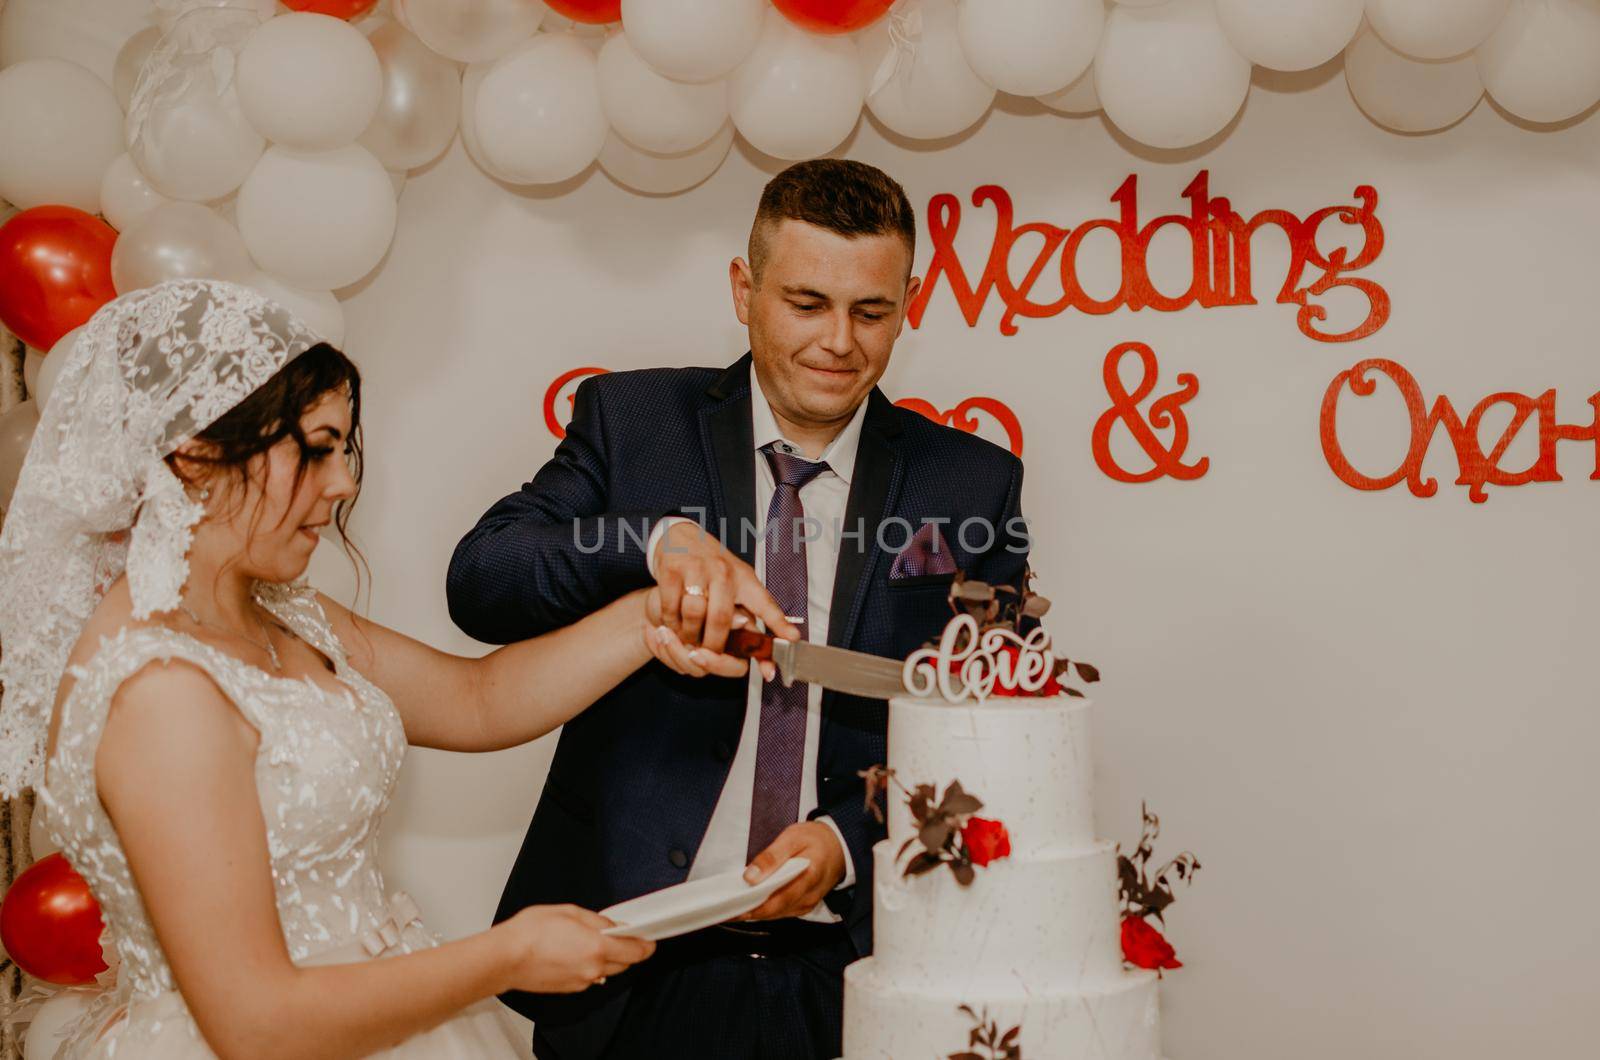 groom and bride at wedding cut their large multi-tiered white cake taste it fed from each other. by AndriiDrachuk